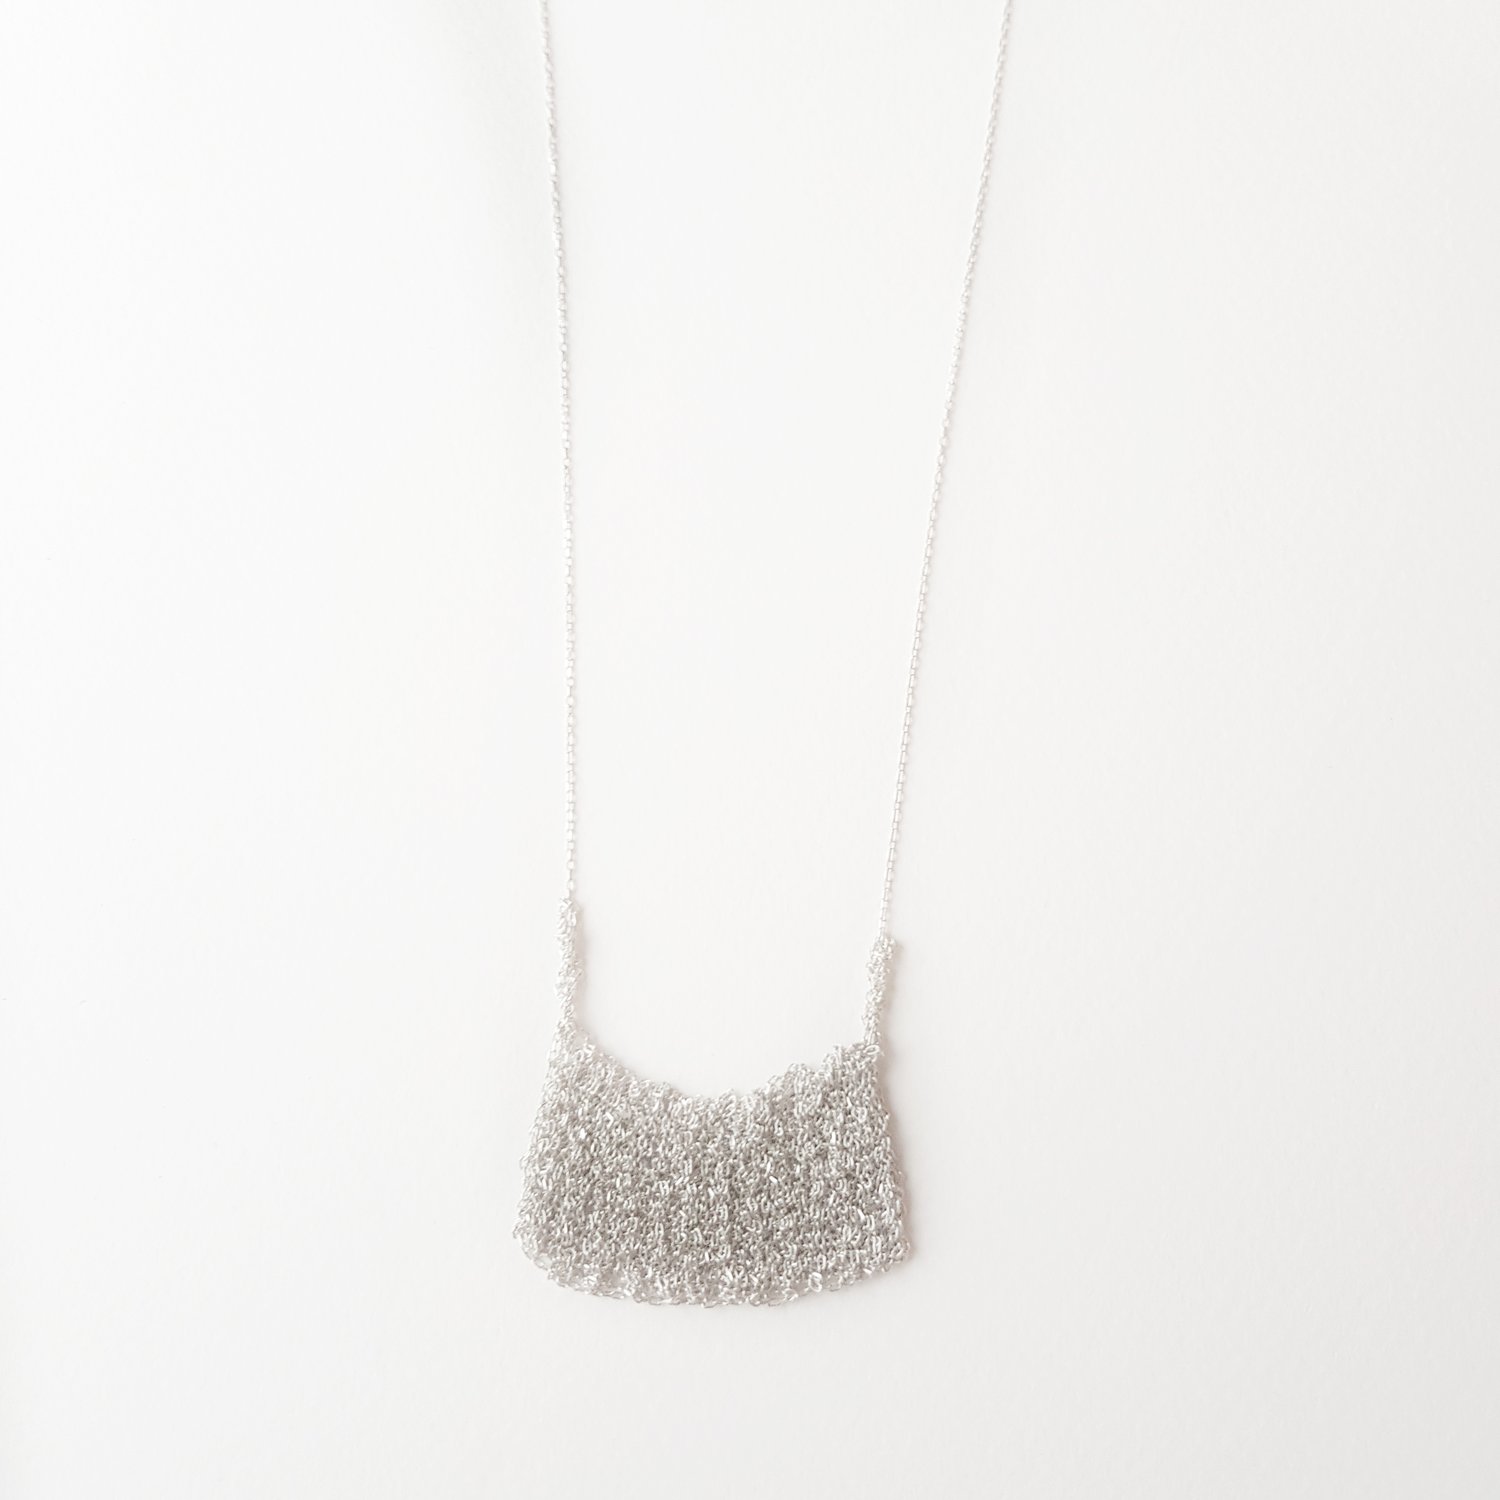 Image of ARC necklace